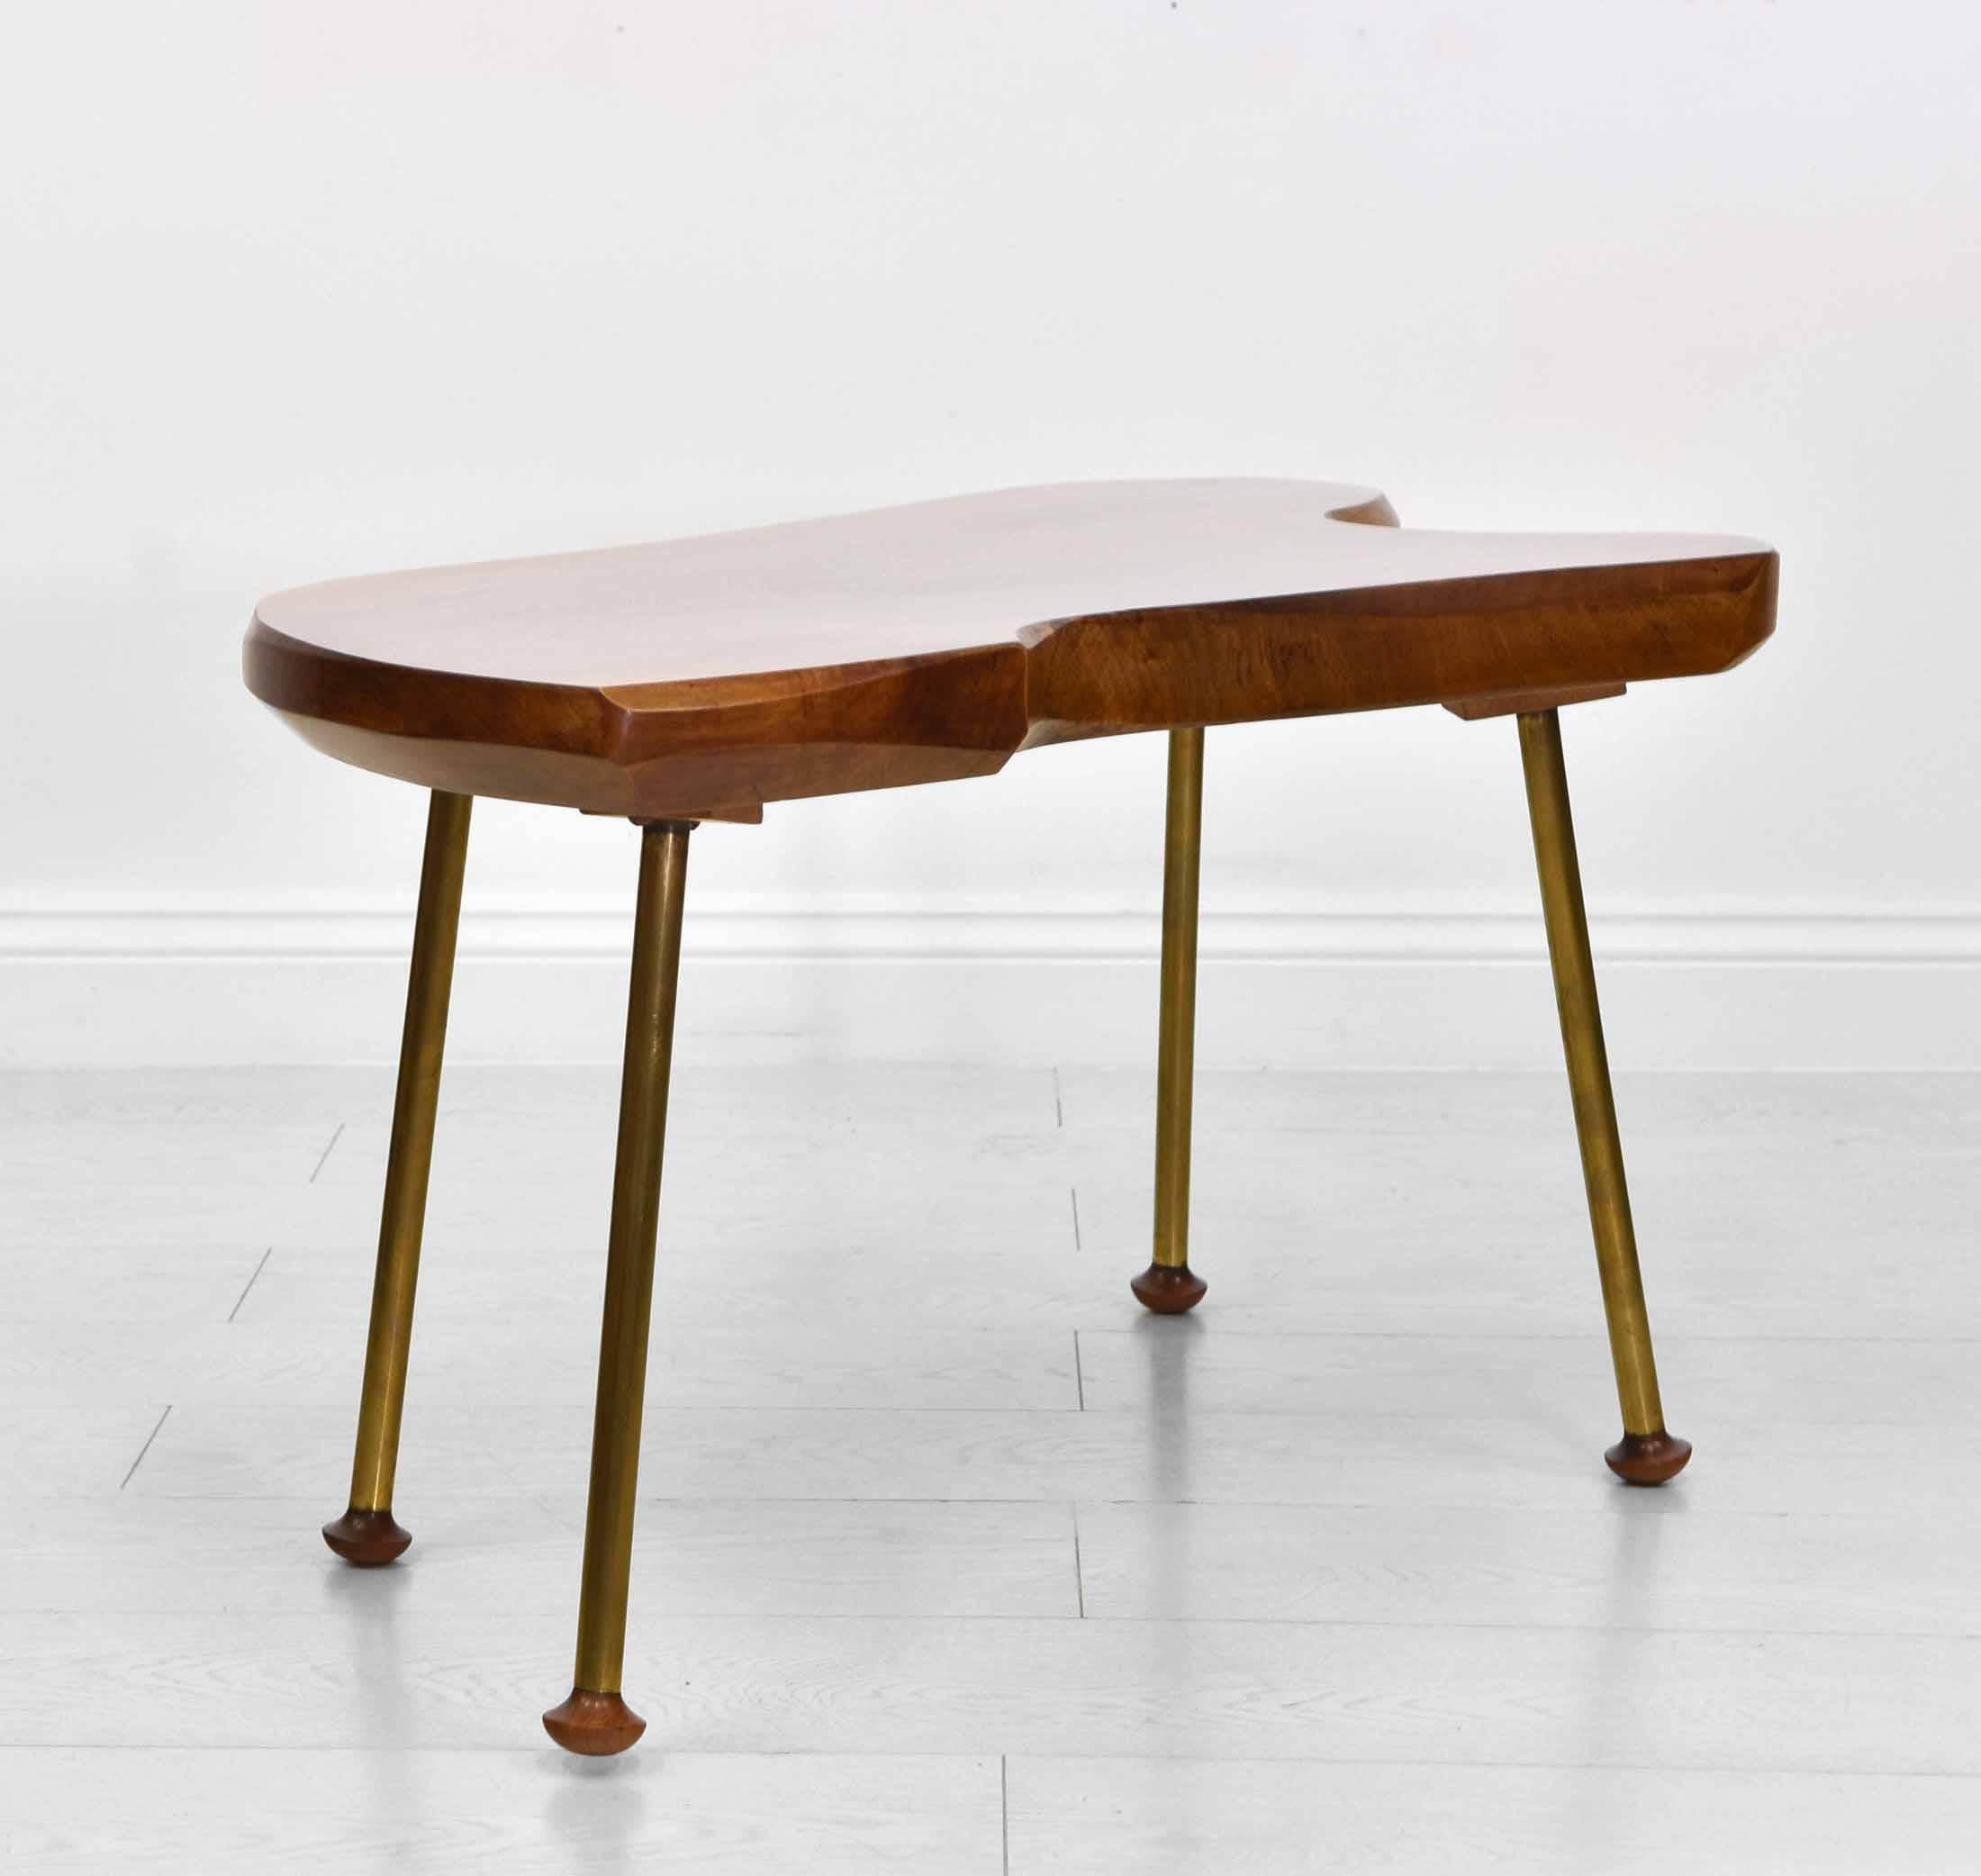 A walnut and brass coffee table in the Carl Auböck style. Circa 1950s.

Free UK delivery.

The table has a solid crown shaped walnut top, terminating on brass tubular legs with teak turned feet.

Overall in very good condition for its age, the top